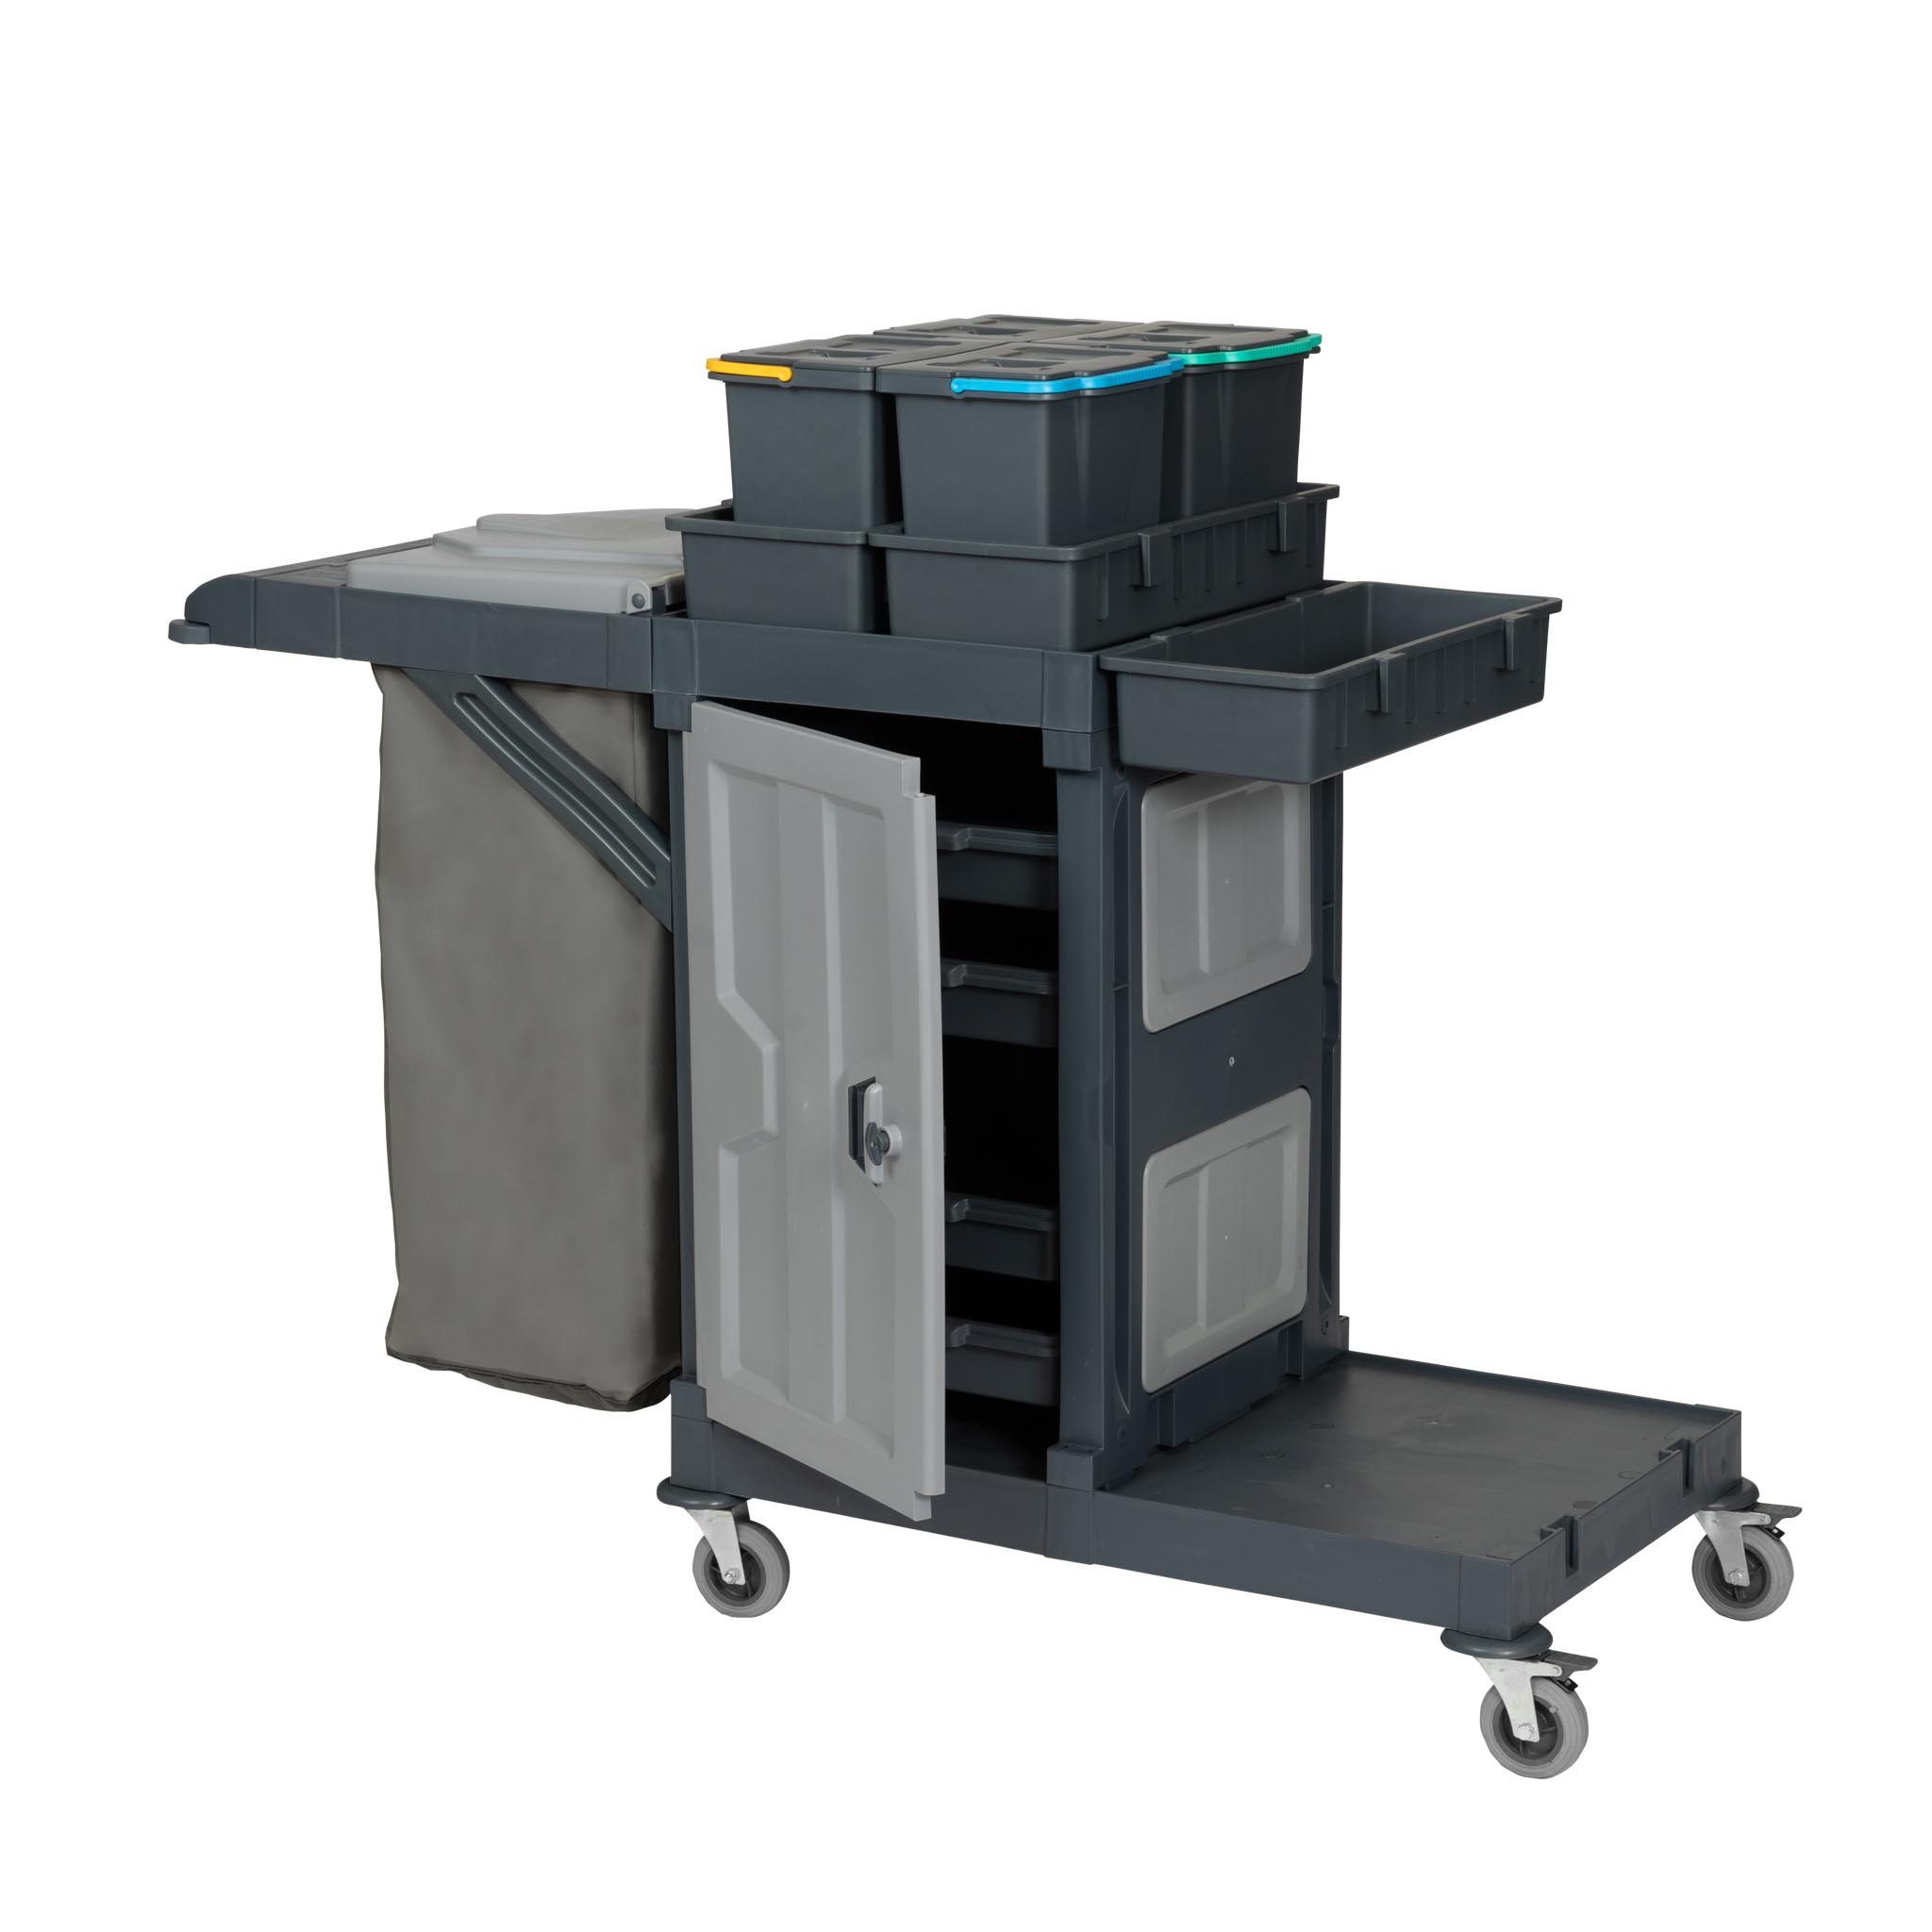 ALFACART CLEANING TROLLEY